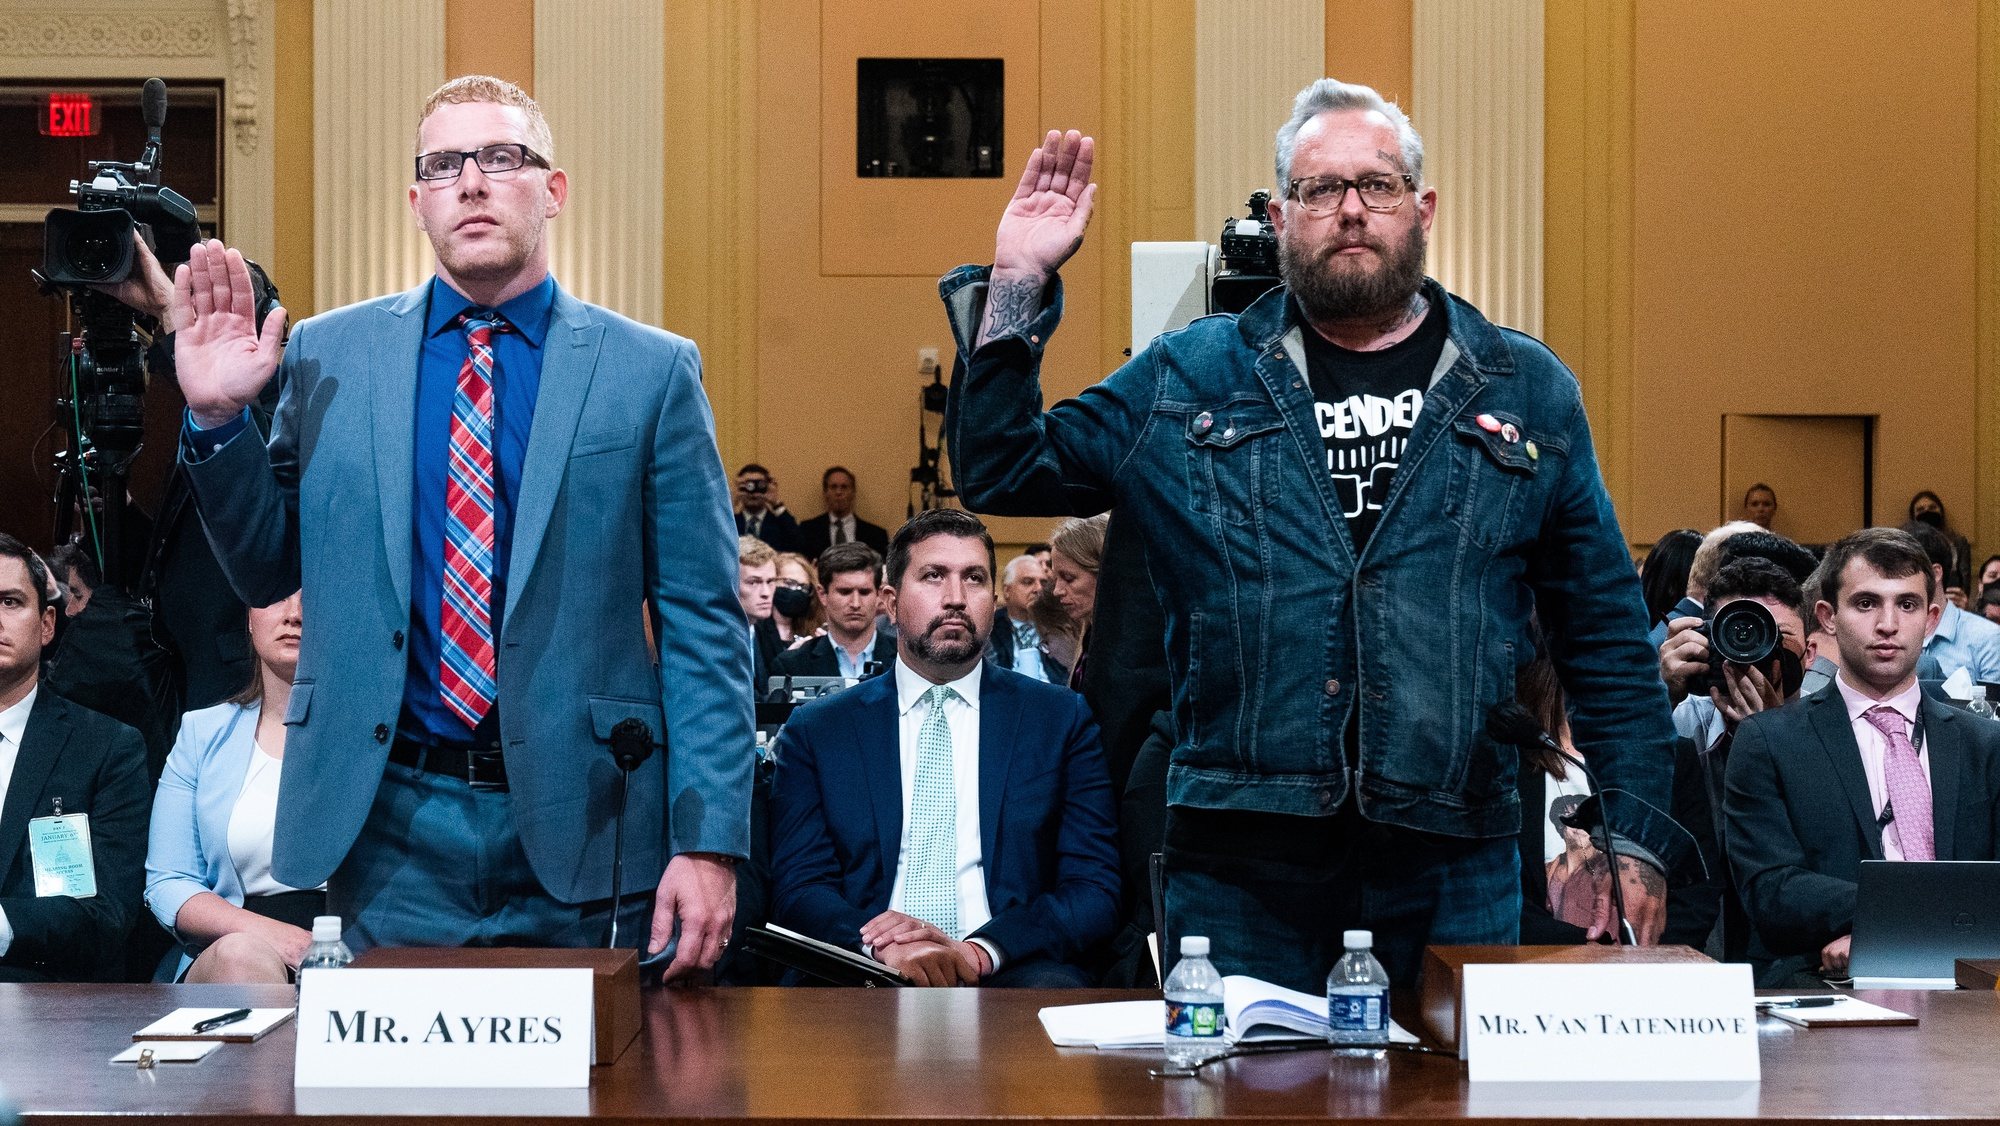 epa10067741 Stephen Ayres and Jason Van Tatenhove, an ally of Oath Keepers leader Stewart Rhodes are sworn in by the House select committee, during a public hearing investigating the January 6th Attack on the US Capitol, in Washington, DC, USA, 12 July 2022.  EPA/DEMETRIUS FREEMAN / POOL